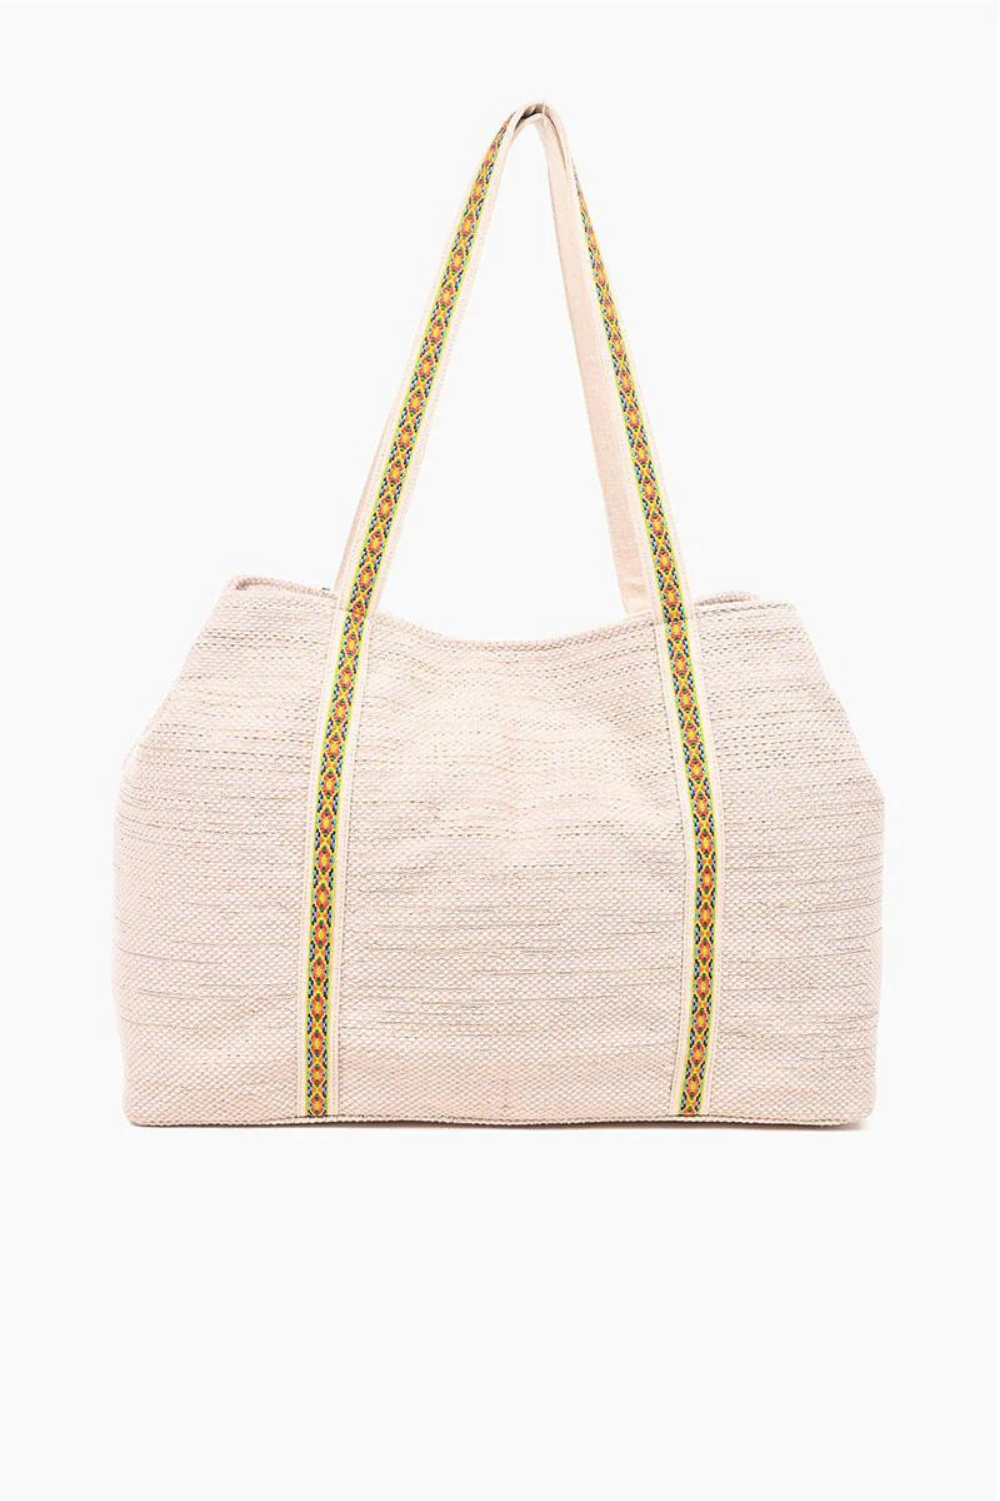 Morning Glory Tote